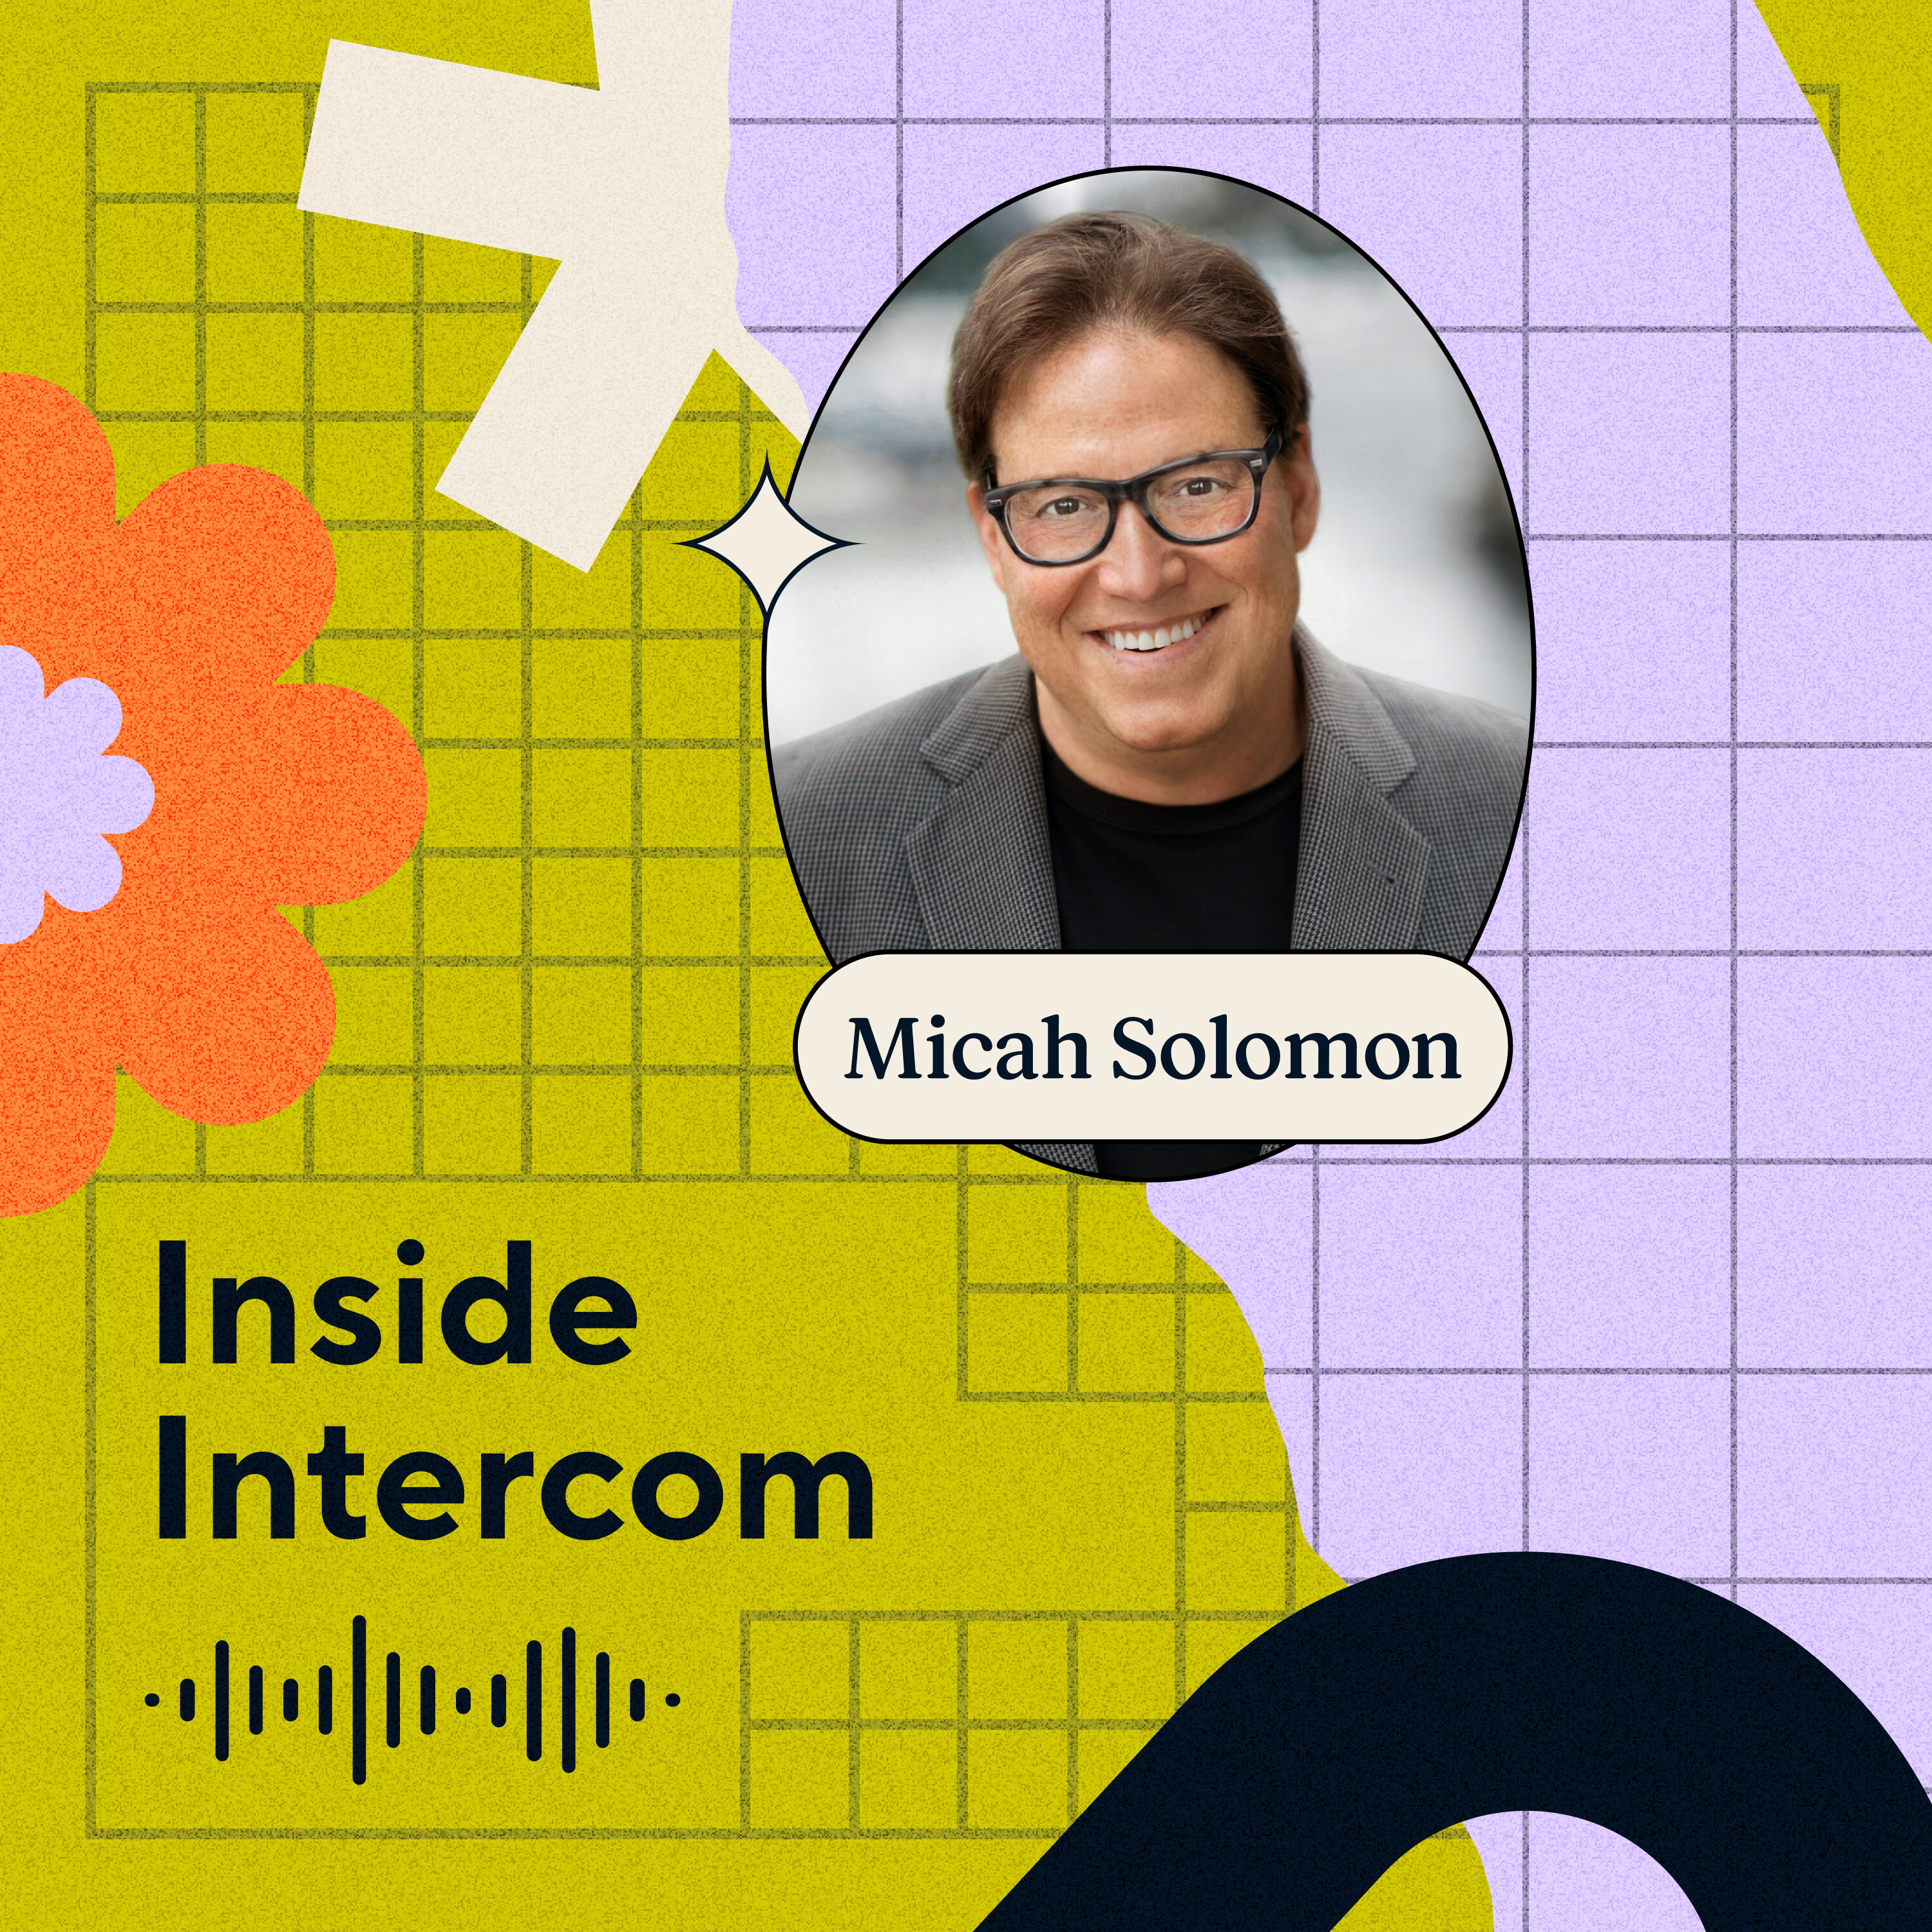 How to take your Customer Service from unforgivable to unforgettable, with Micah Solomon